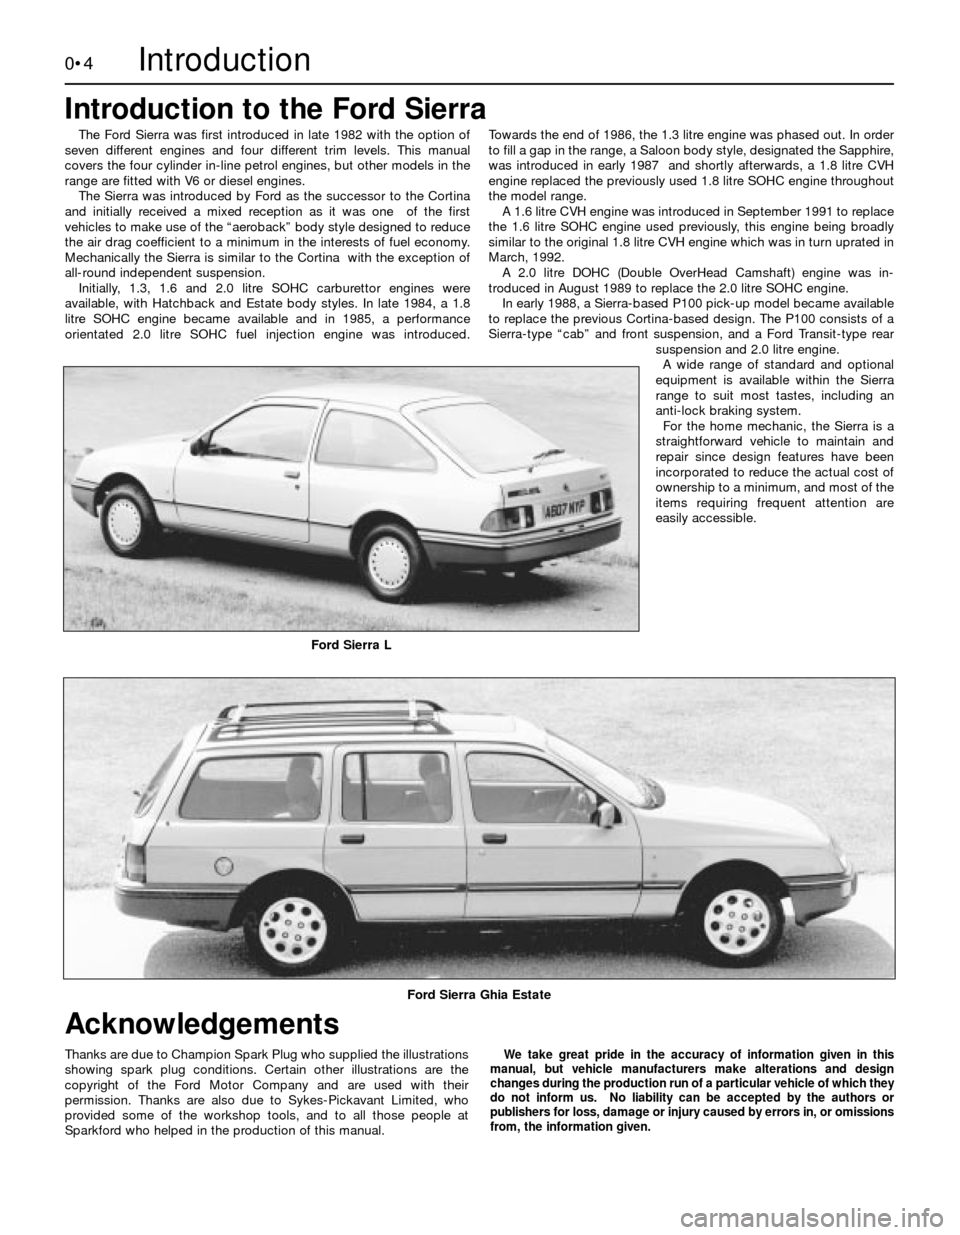 FORD SIERRA 1982 1.G Introduction Workshop Manual 0•4
The Ford Sierra was first introduced in late 1982 with the option of
seven different engines and four different trim levels. This manual
covers the four cylinder in-line petrol engines, but othe